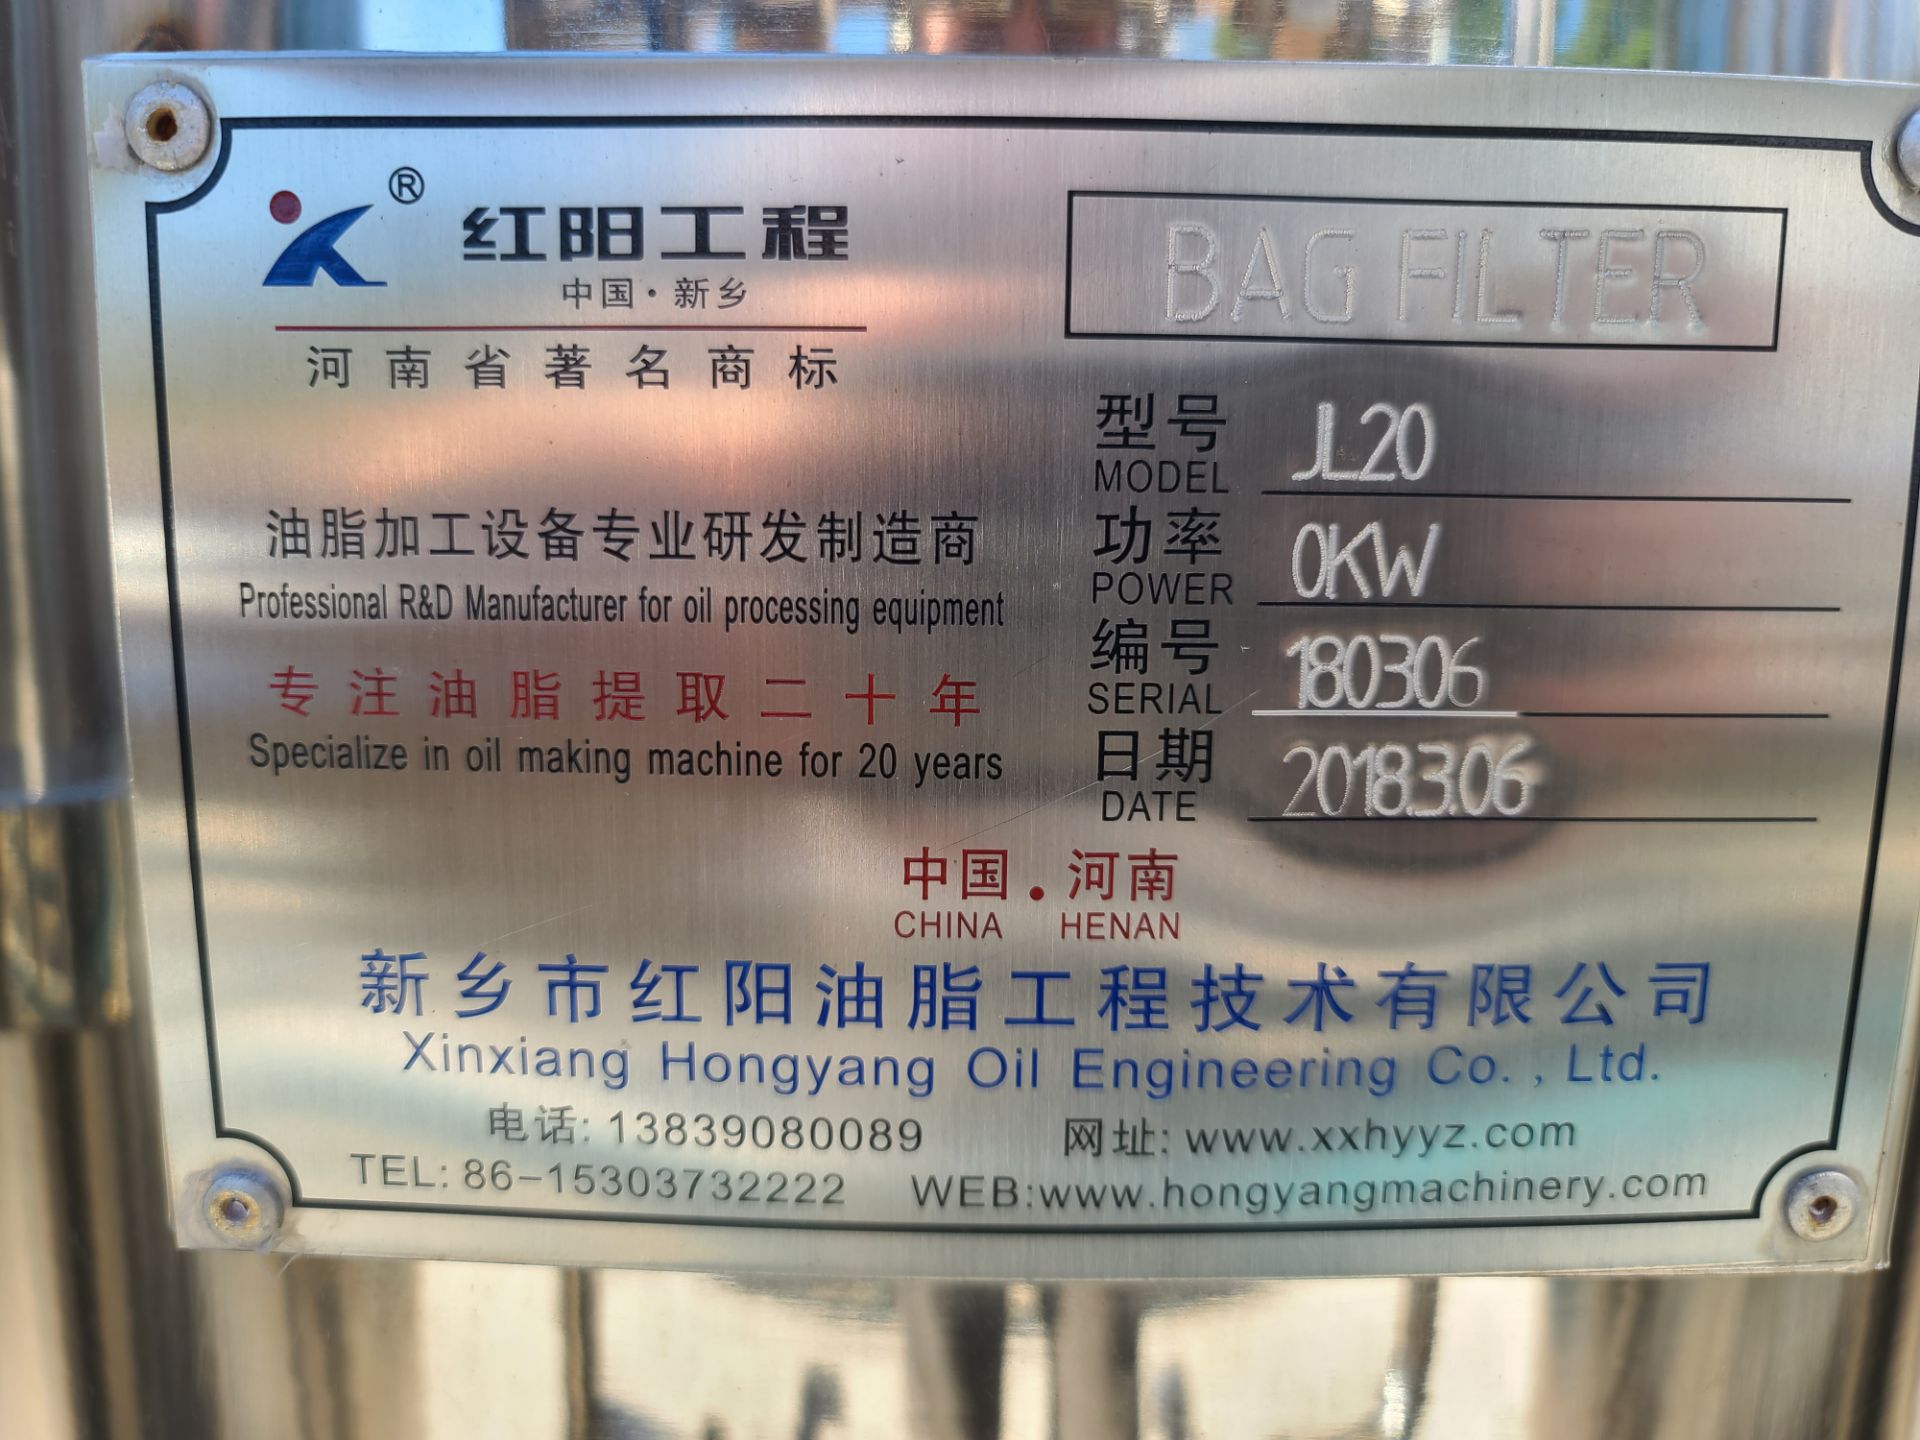 Used Xinxiang Hongyang Oil Engineering Co Extraction Skid w/ 4 Individual Mixed Reactors. - Image 5 of 9